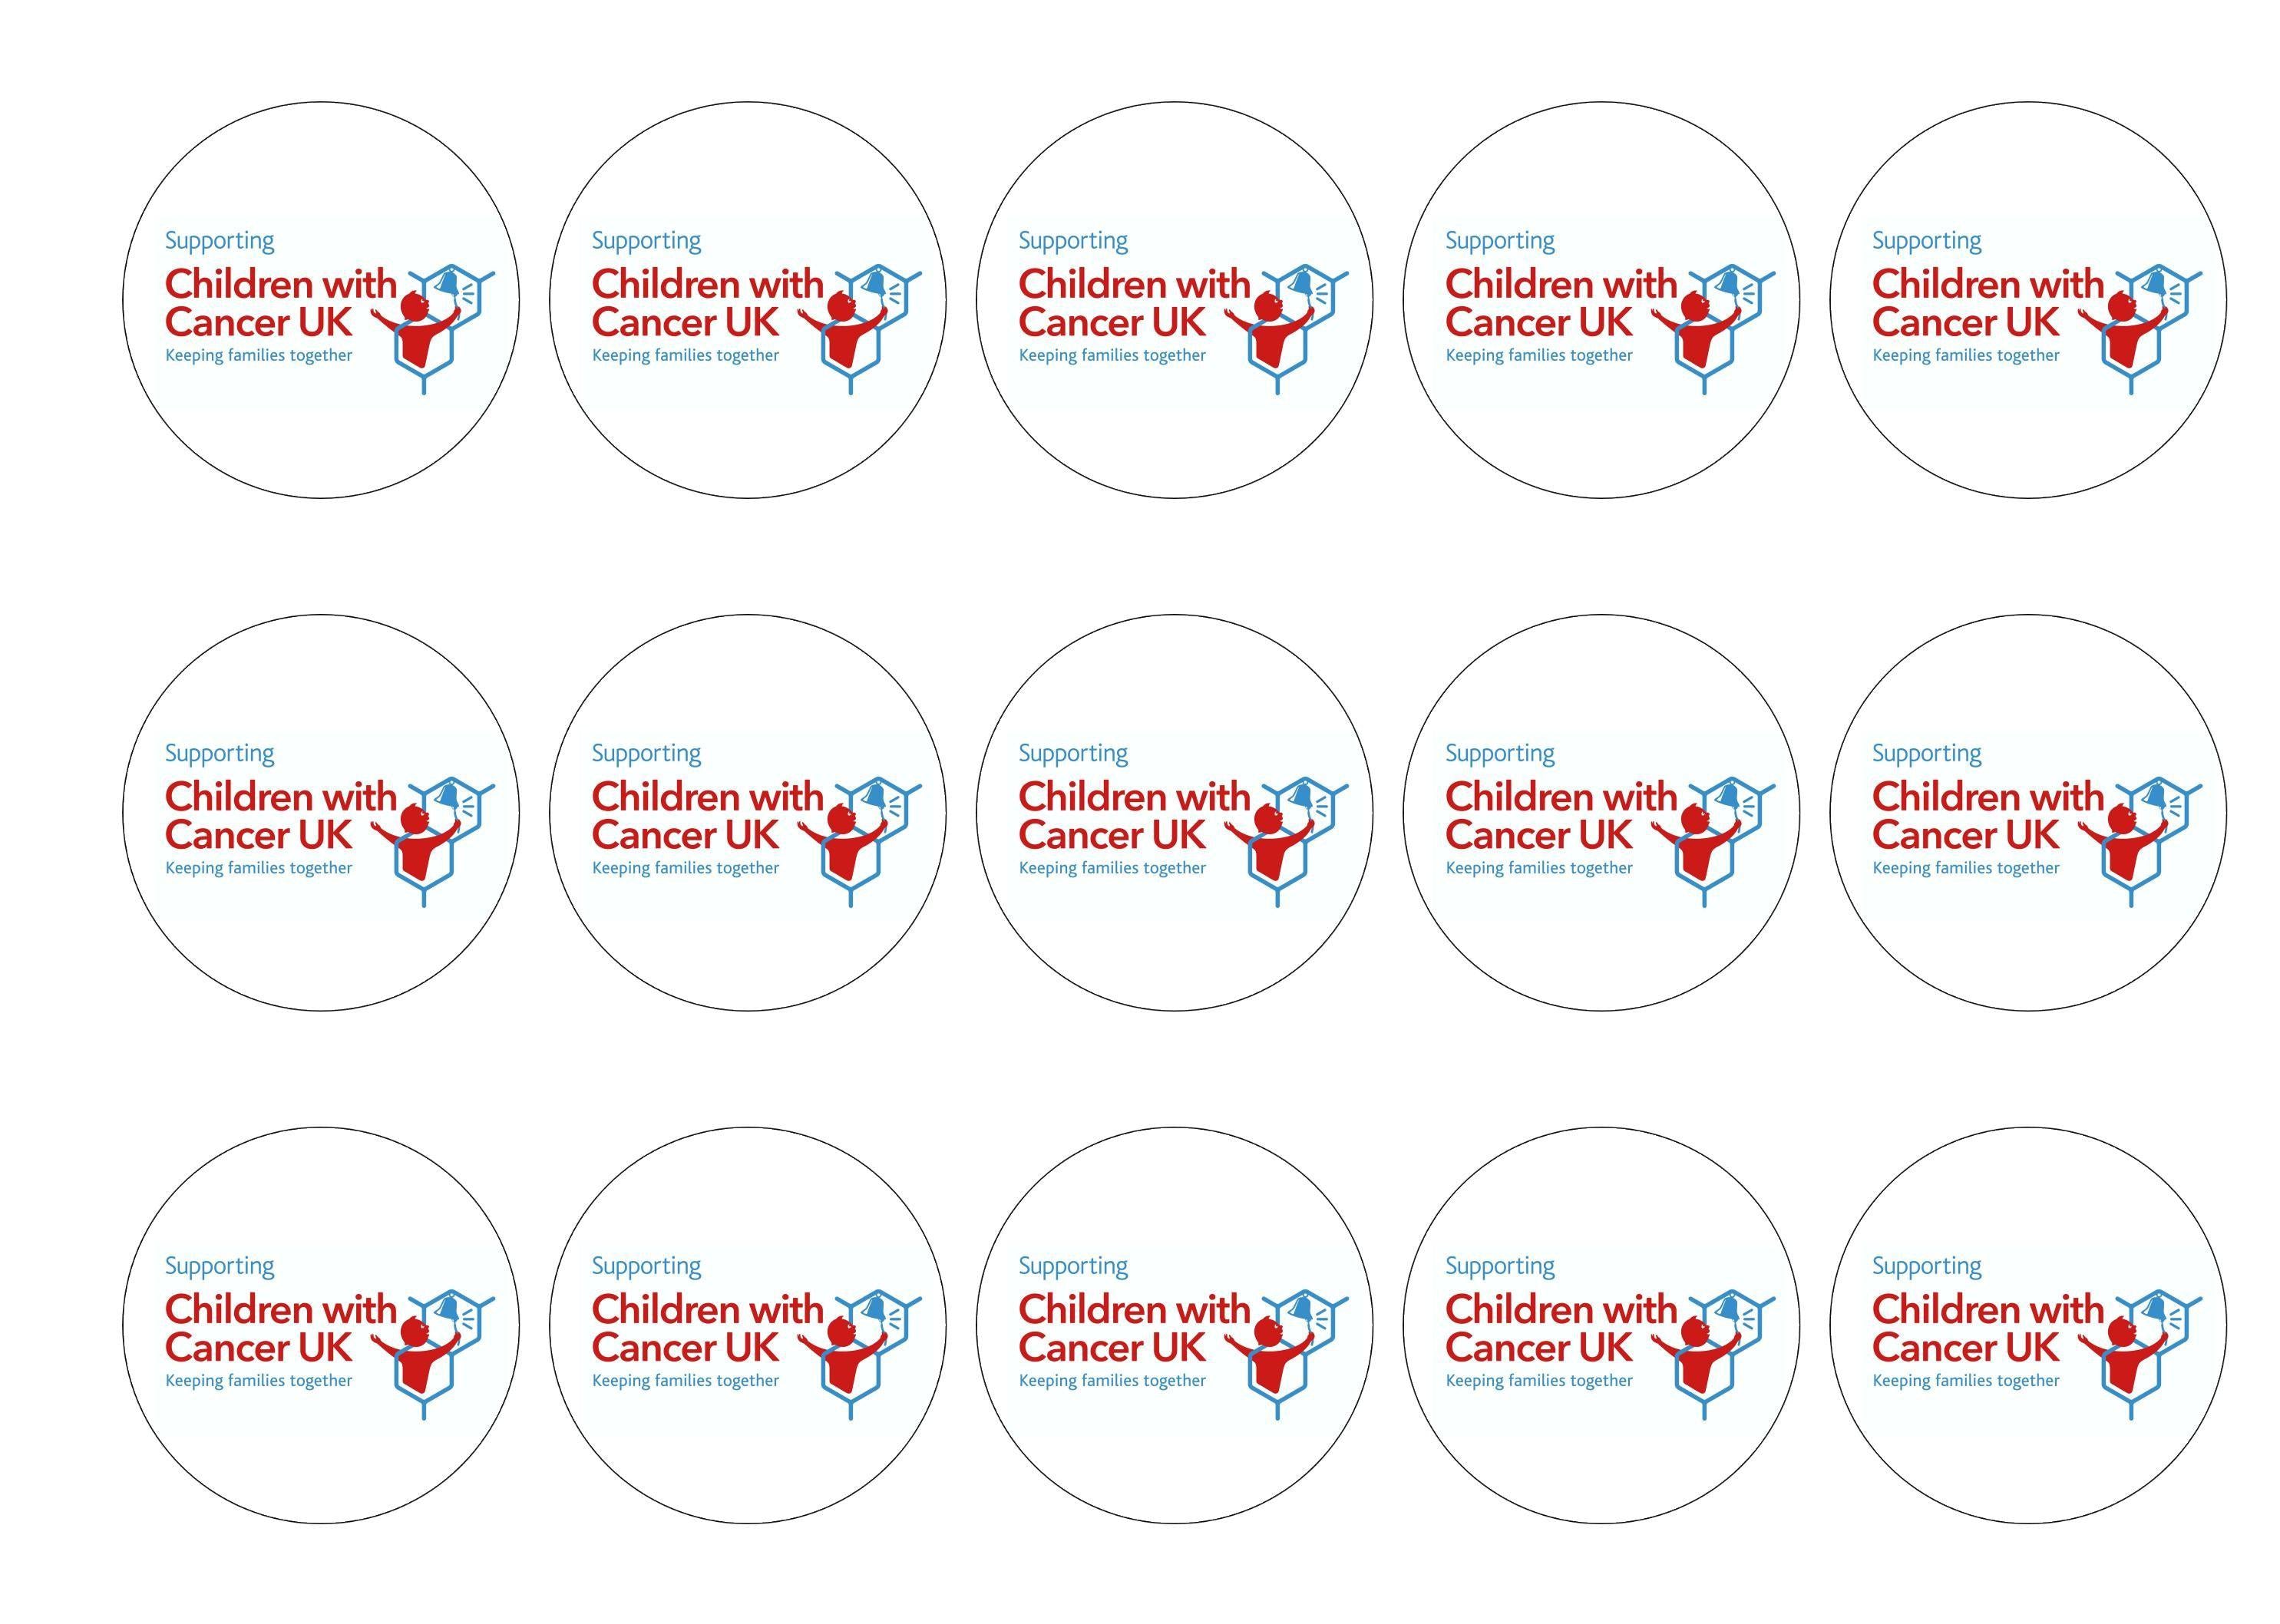 15 printed cupcake toppers for supporting Children with Cancer UK